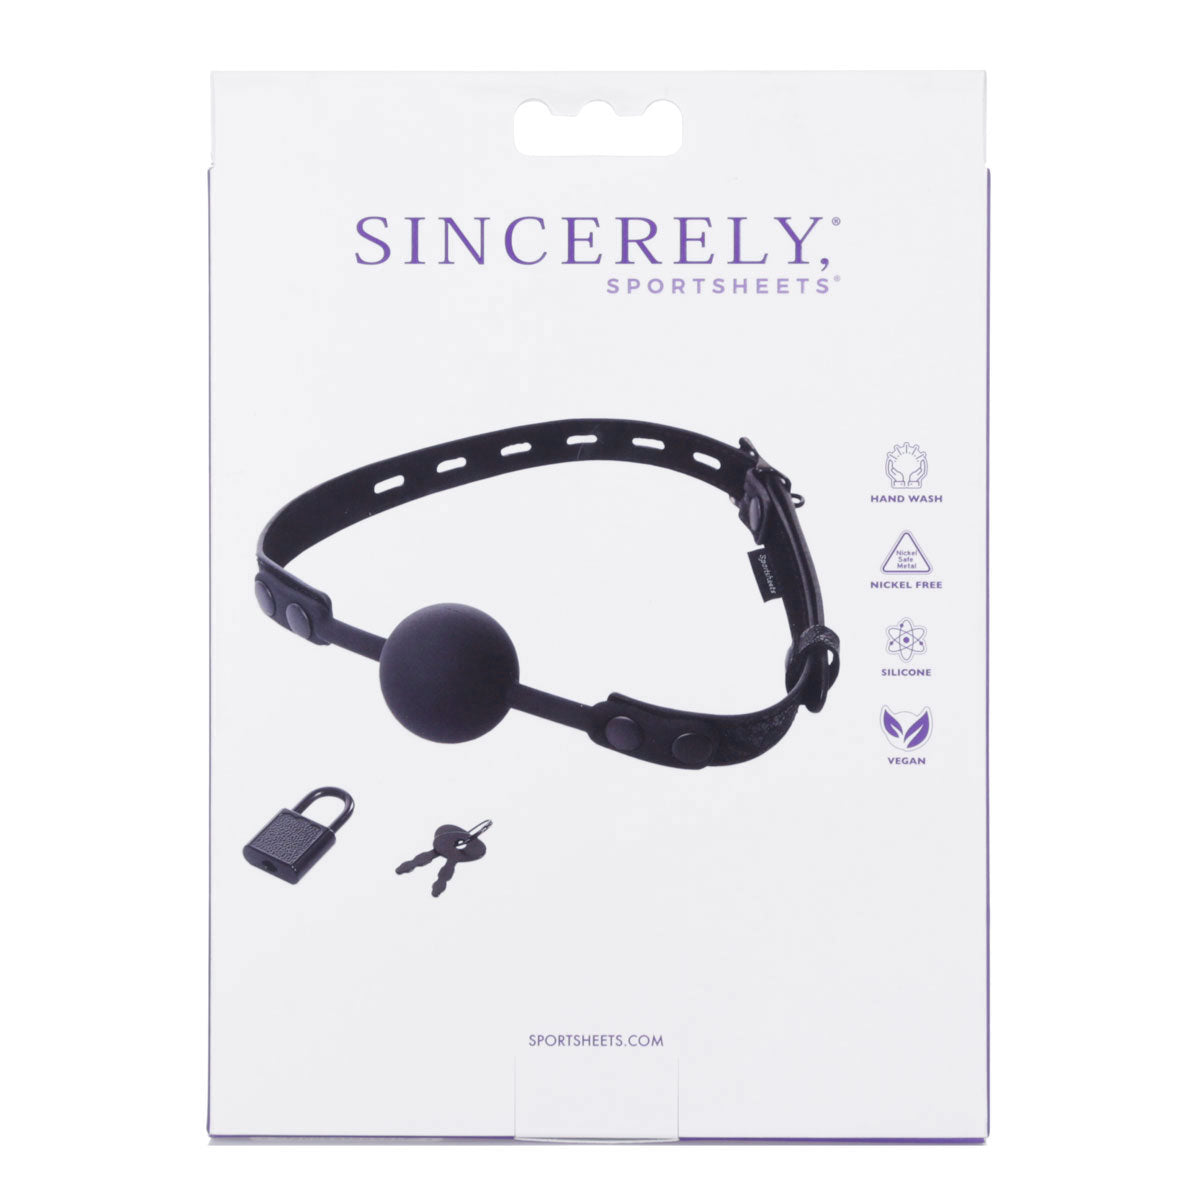 Sportsheets Sincerely Locking Lace Ball Gag